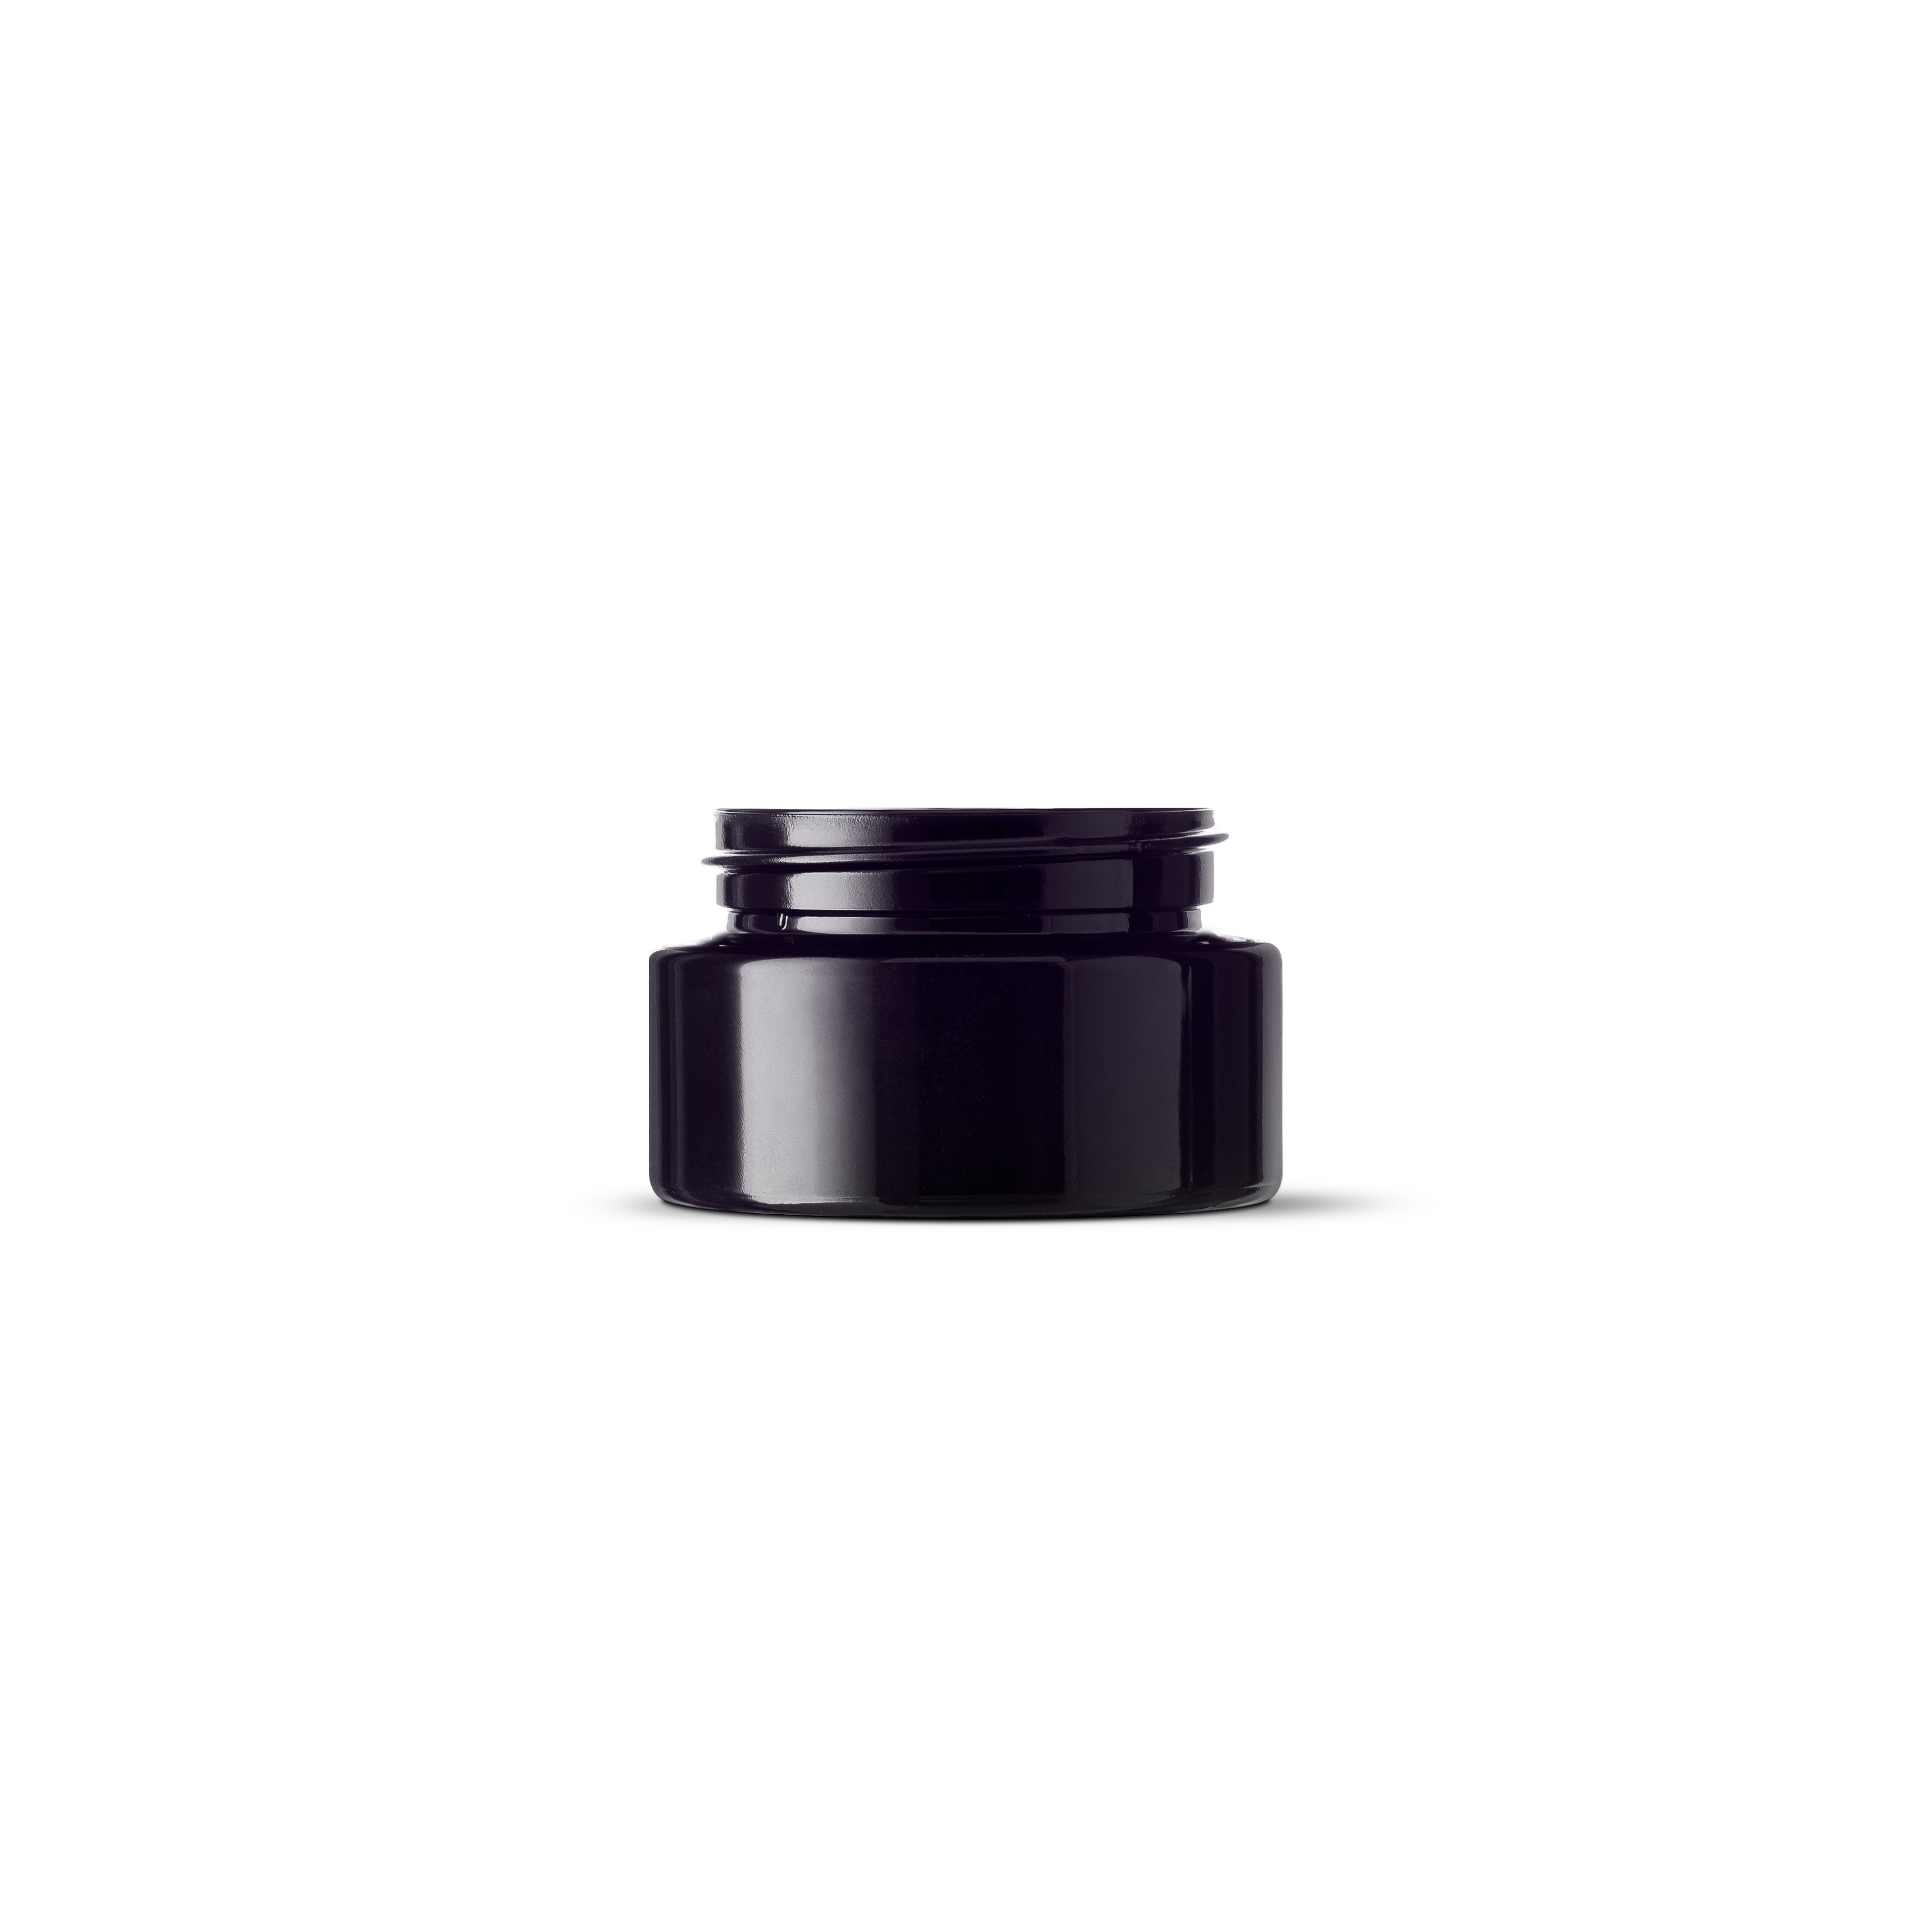 Cosmetic jar Eris 30 ml, 45 special thread, fit for child-resistant lid, Miron